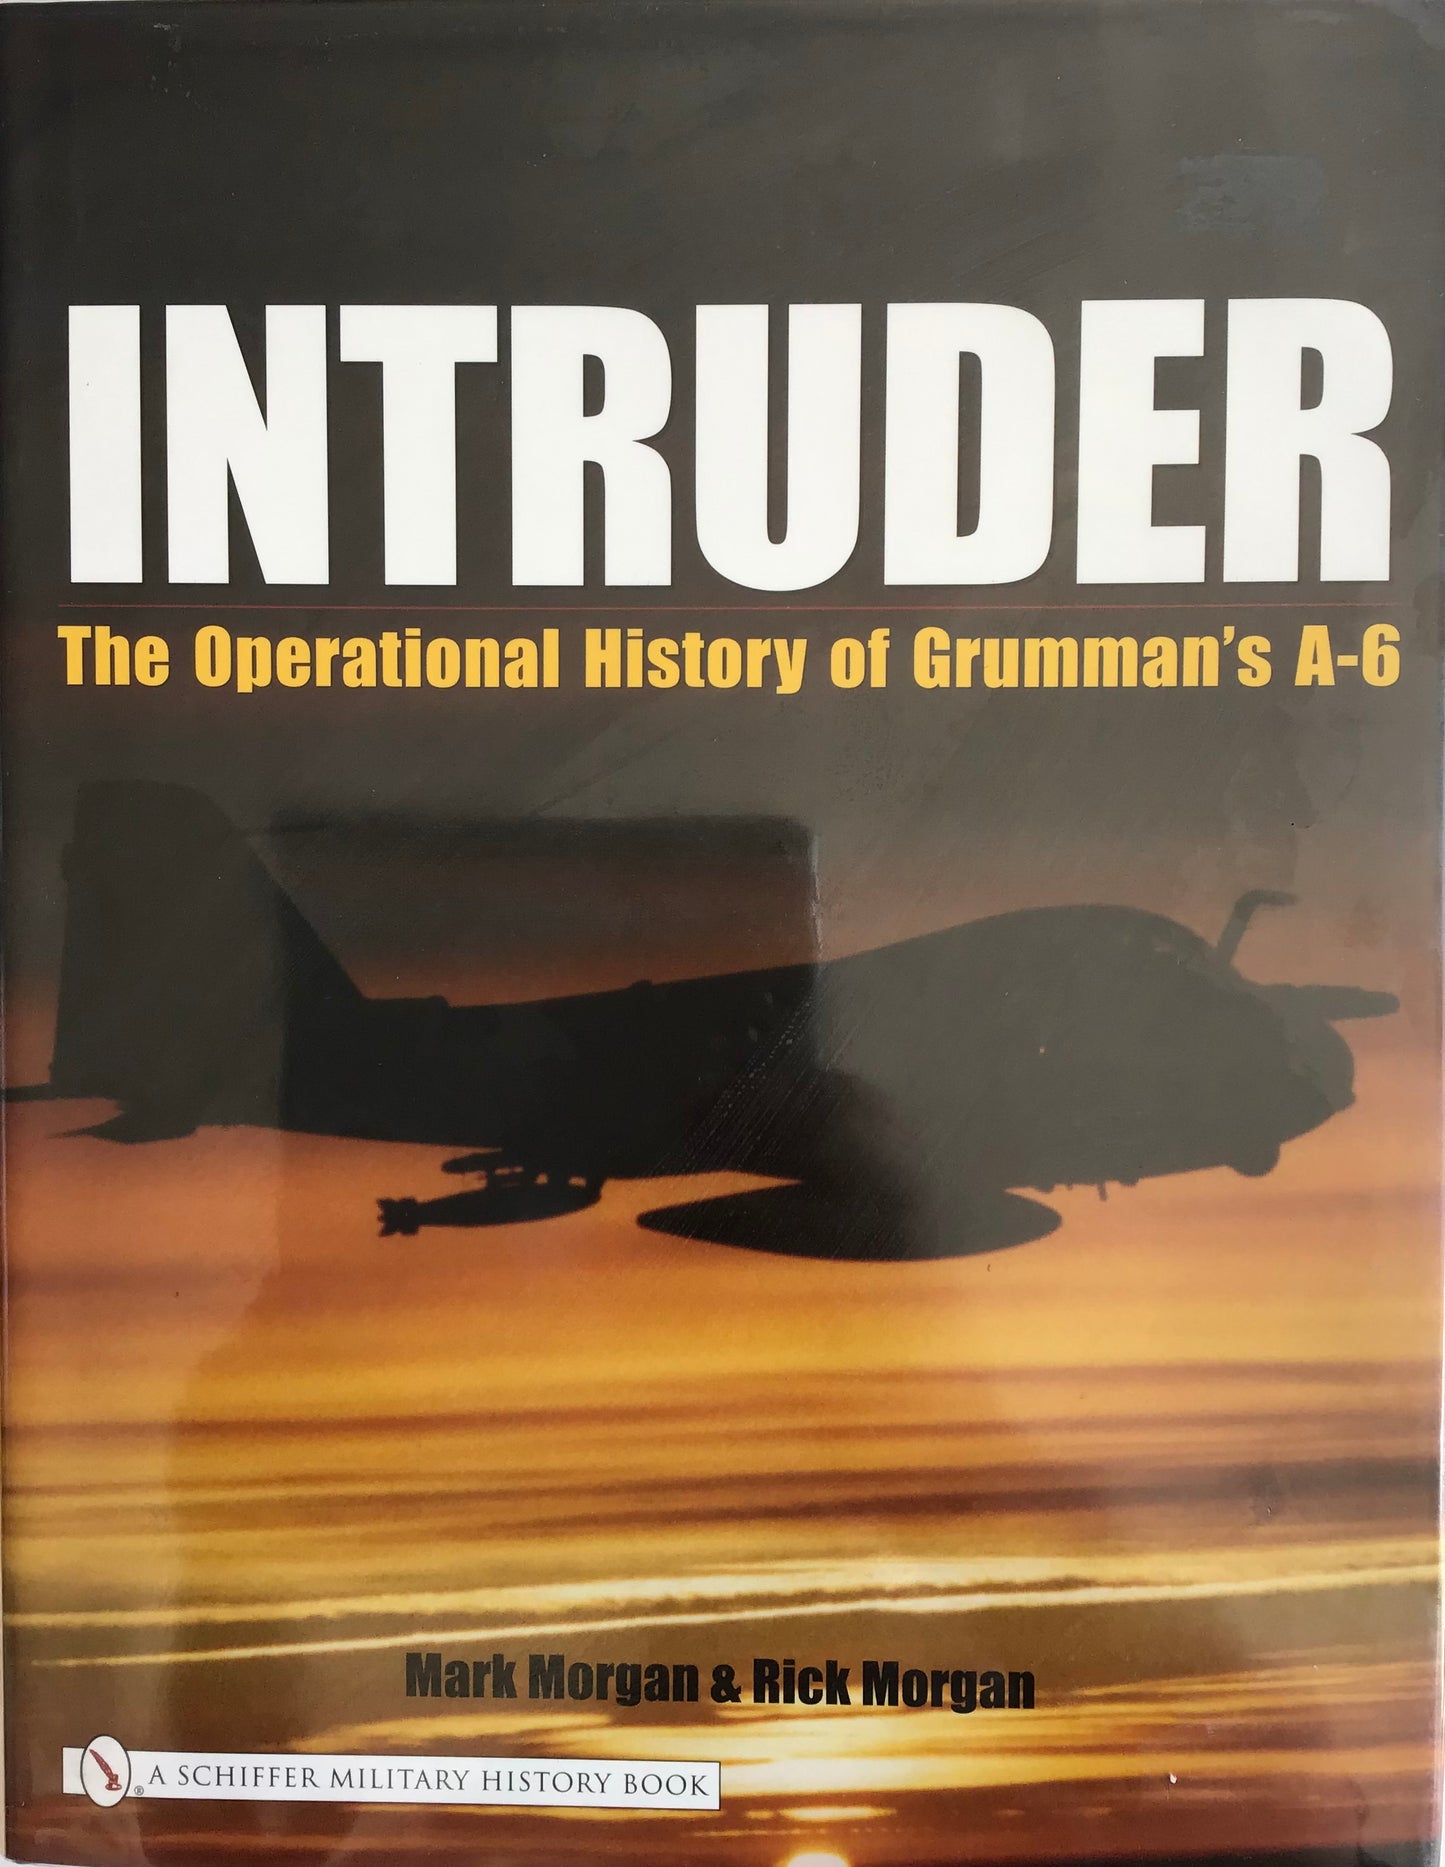 Intruder: The Operational History of Grumman's A-6 by Mark Morgan and Rick Morgan - Chester Model Centre